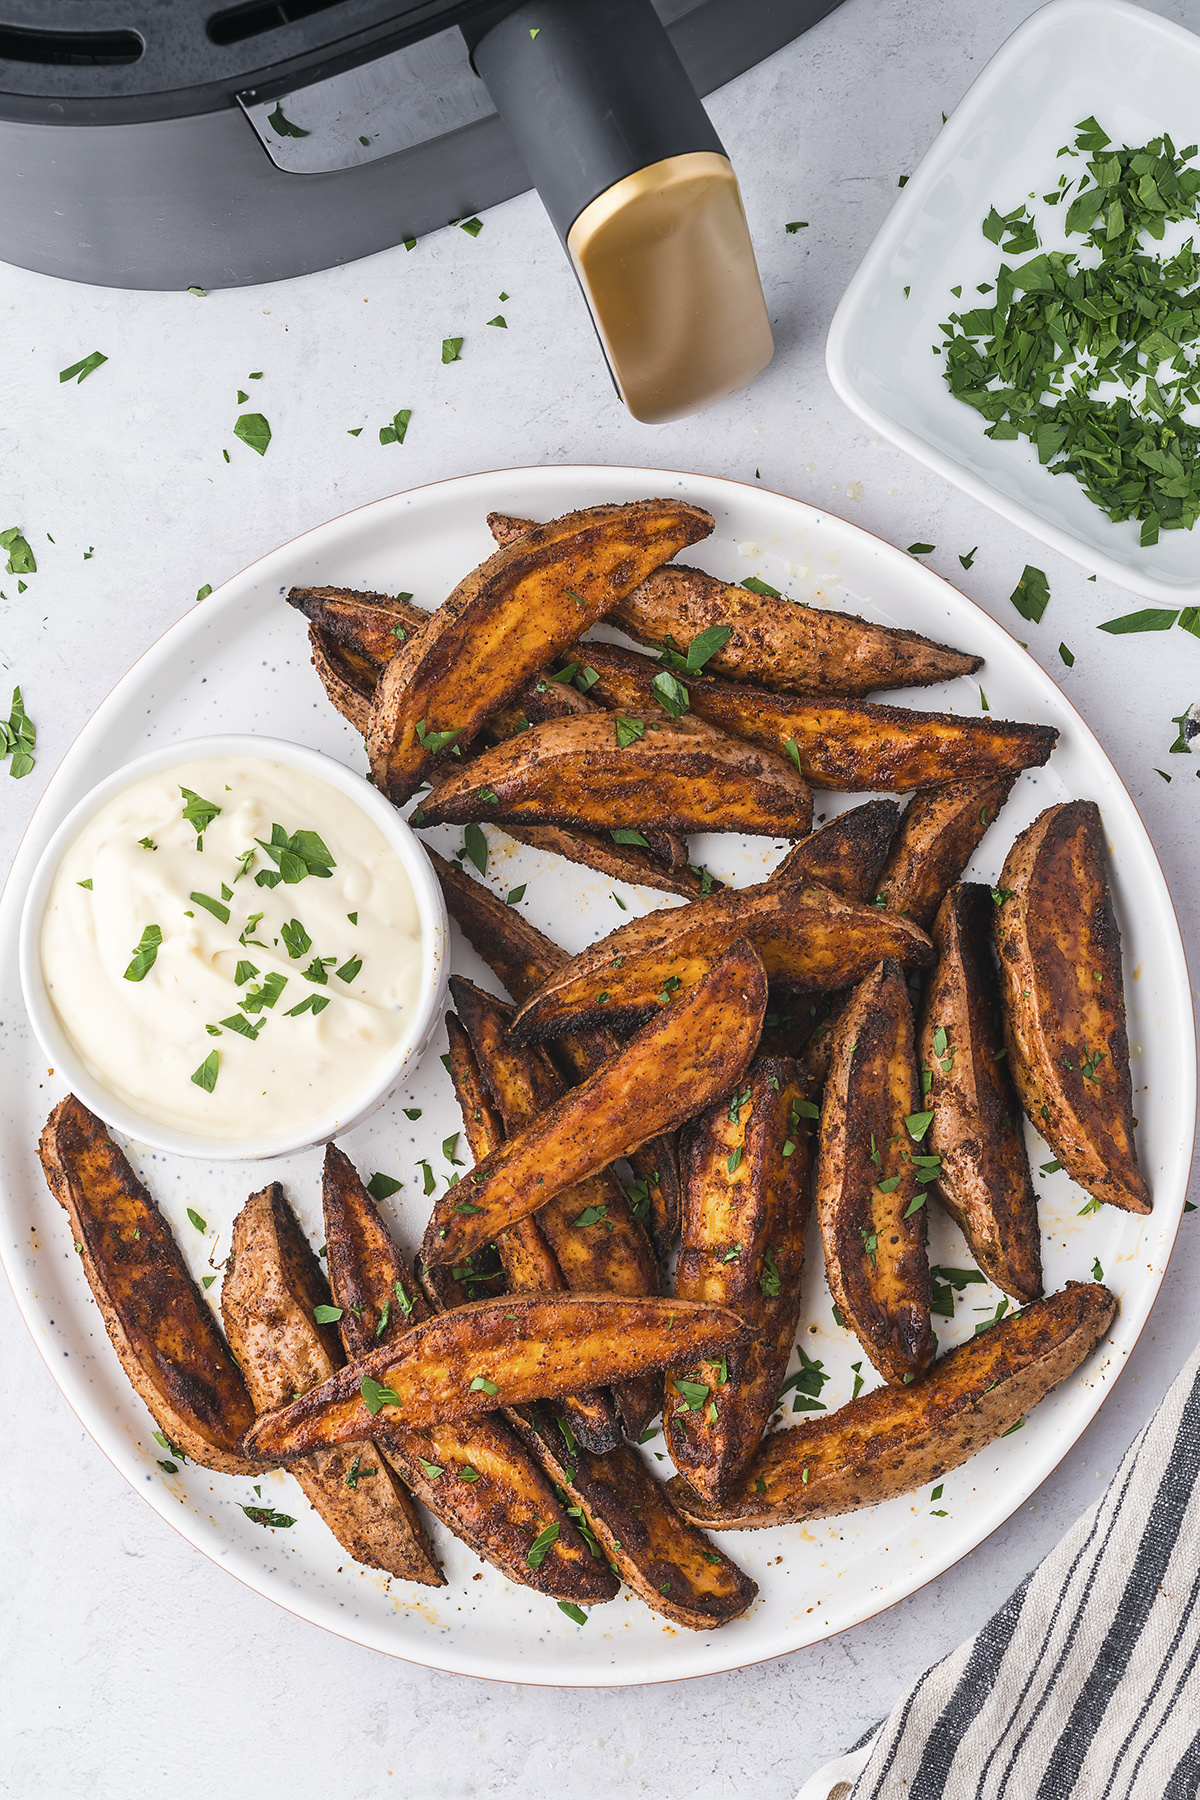 Sweet potato wedges in front of an air fryer.